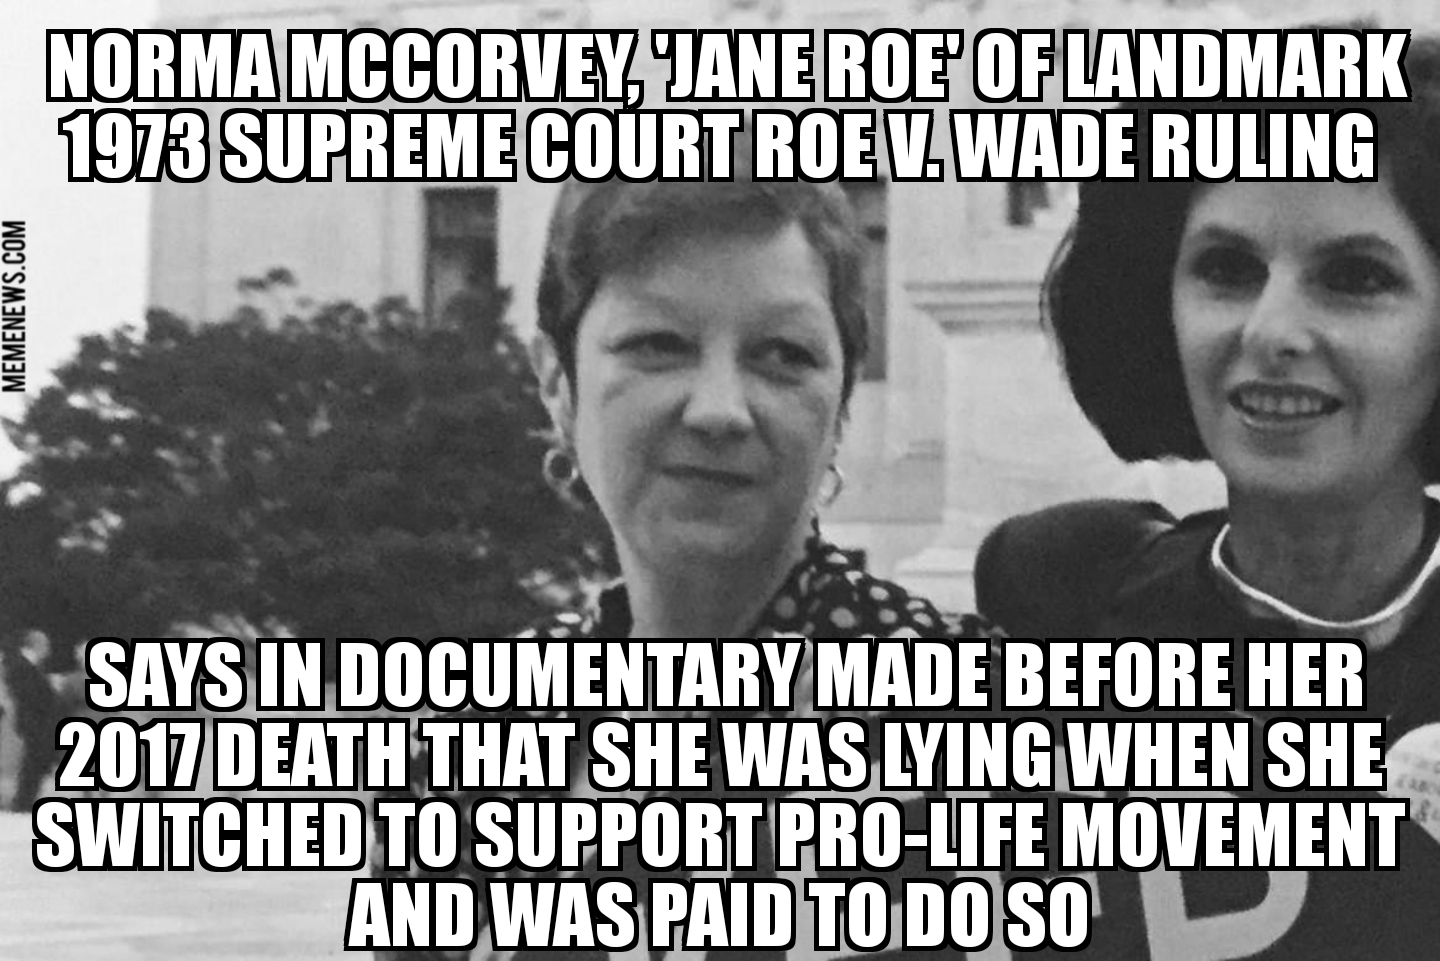 Norma McCorvey says she was paid to support pro-life movement